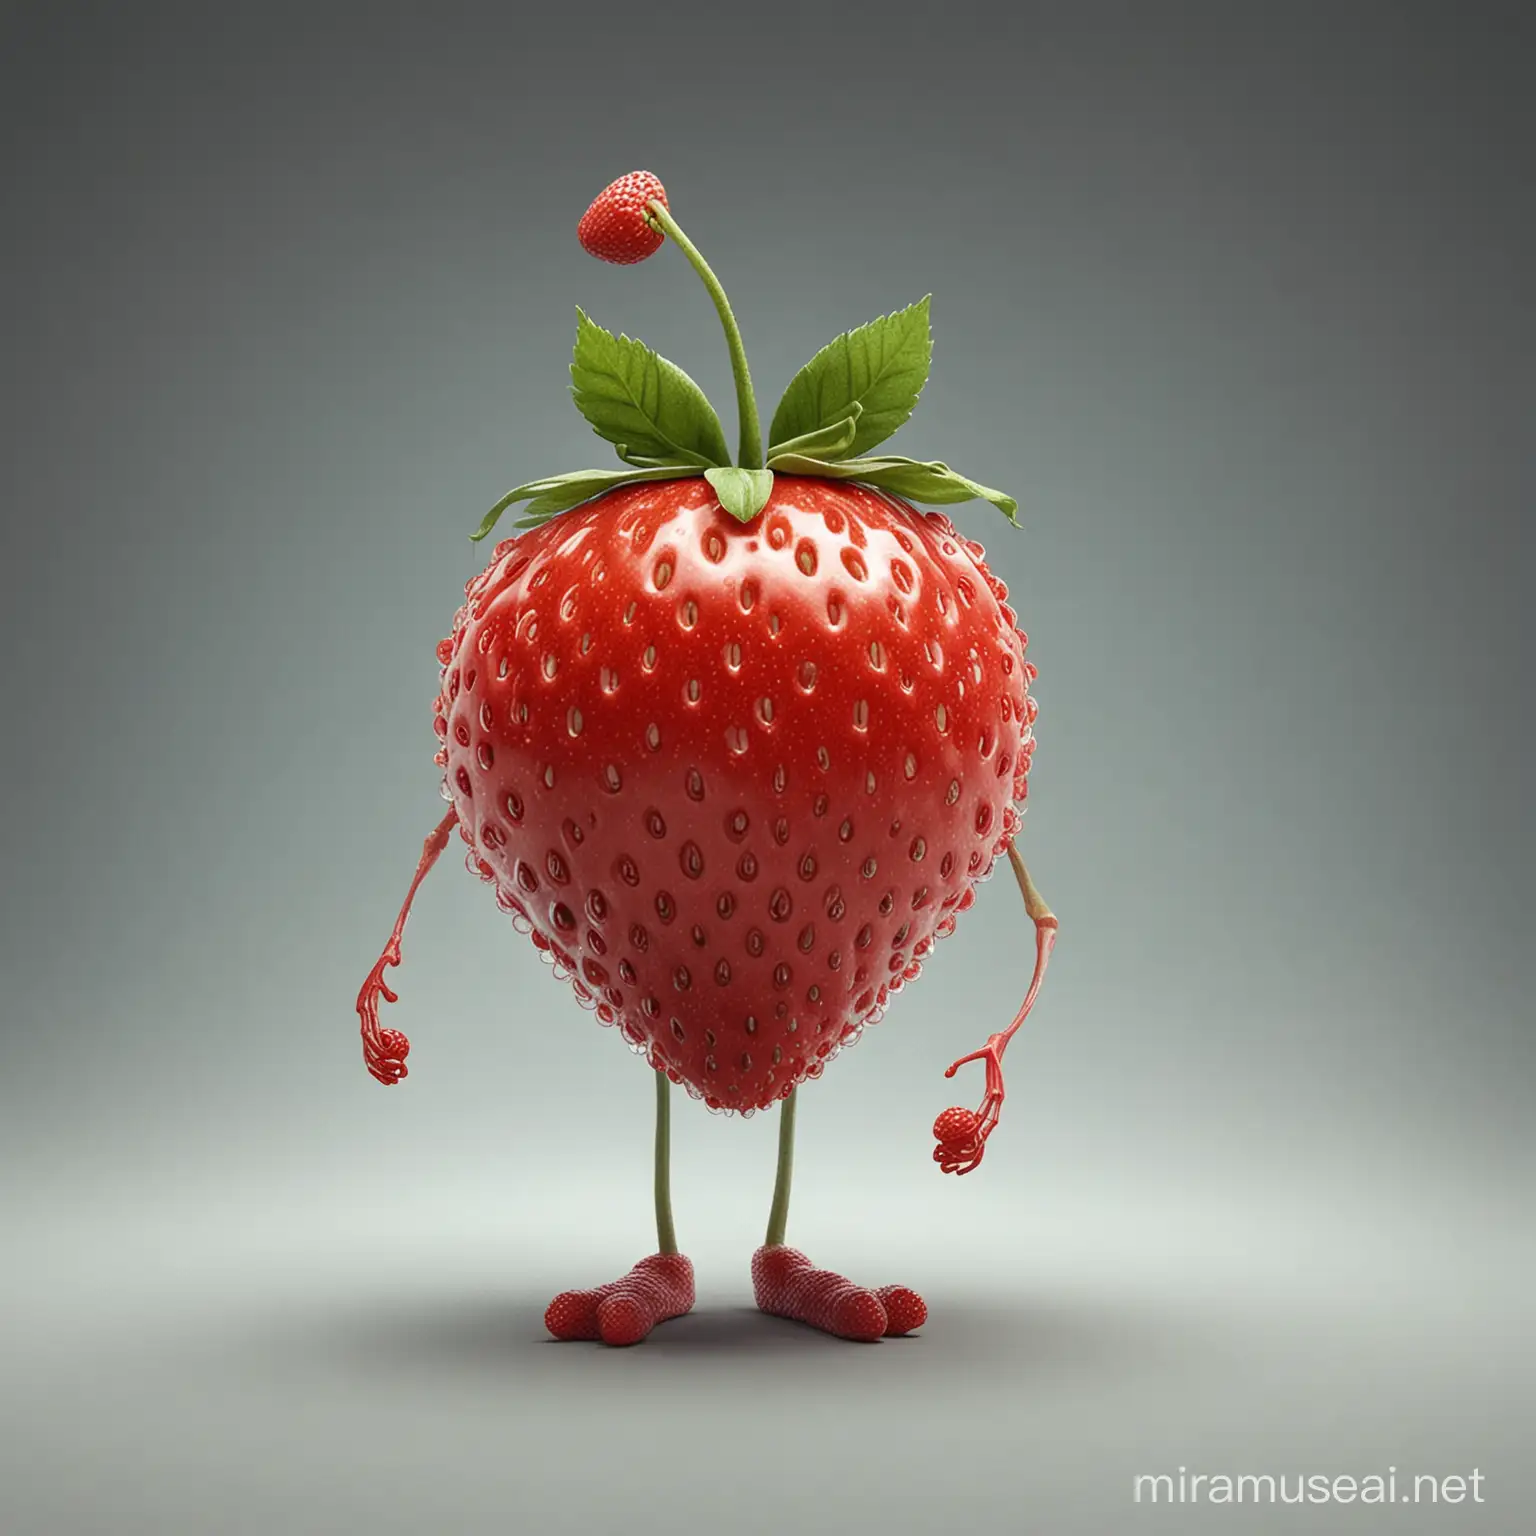 Whimsical Strawberry Person with Humanlike Features